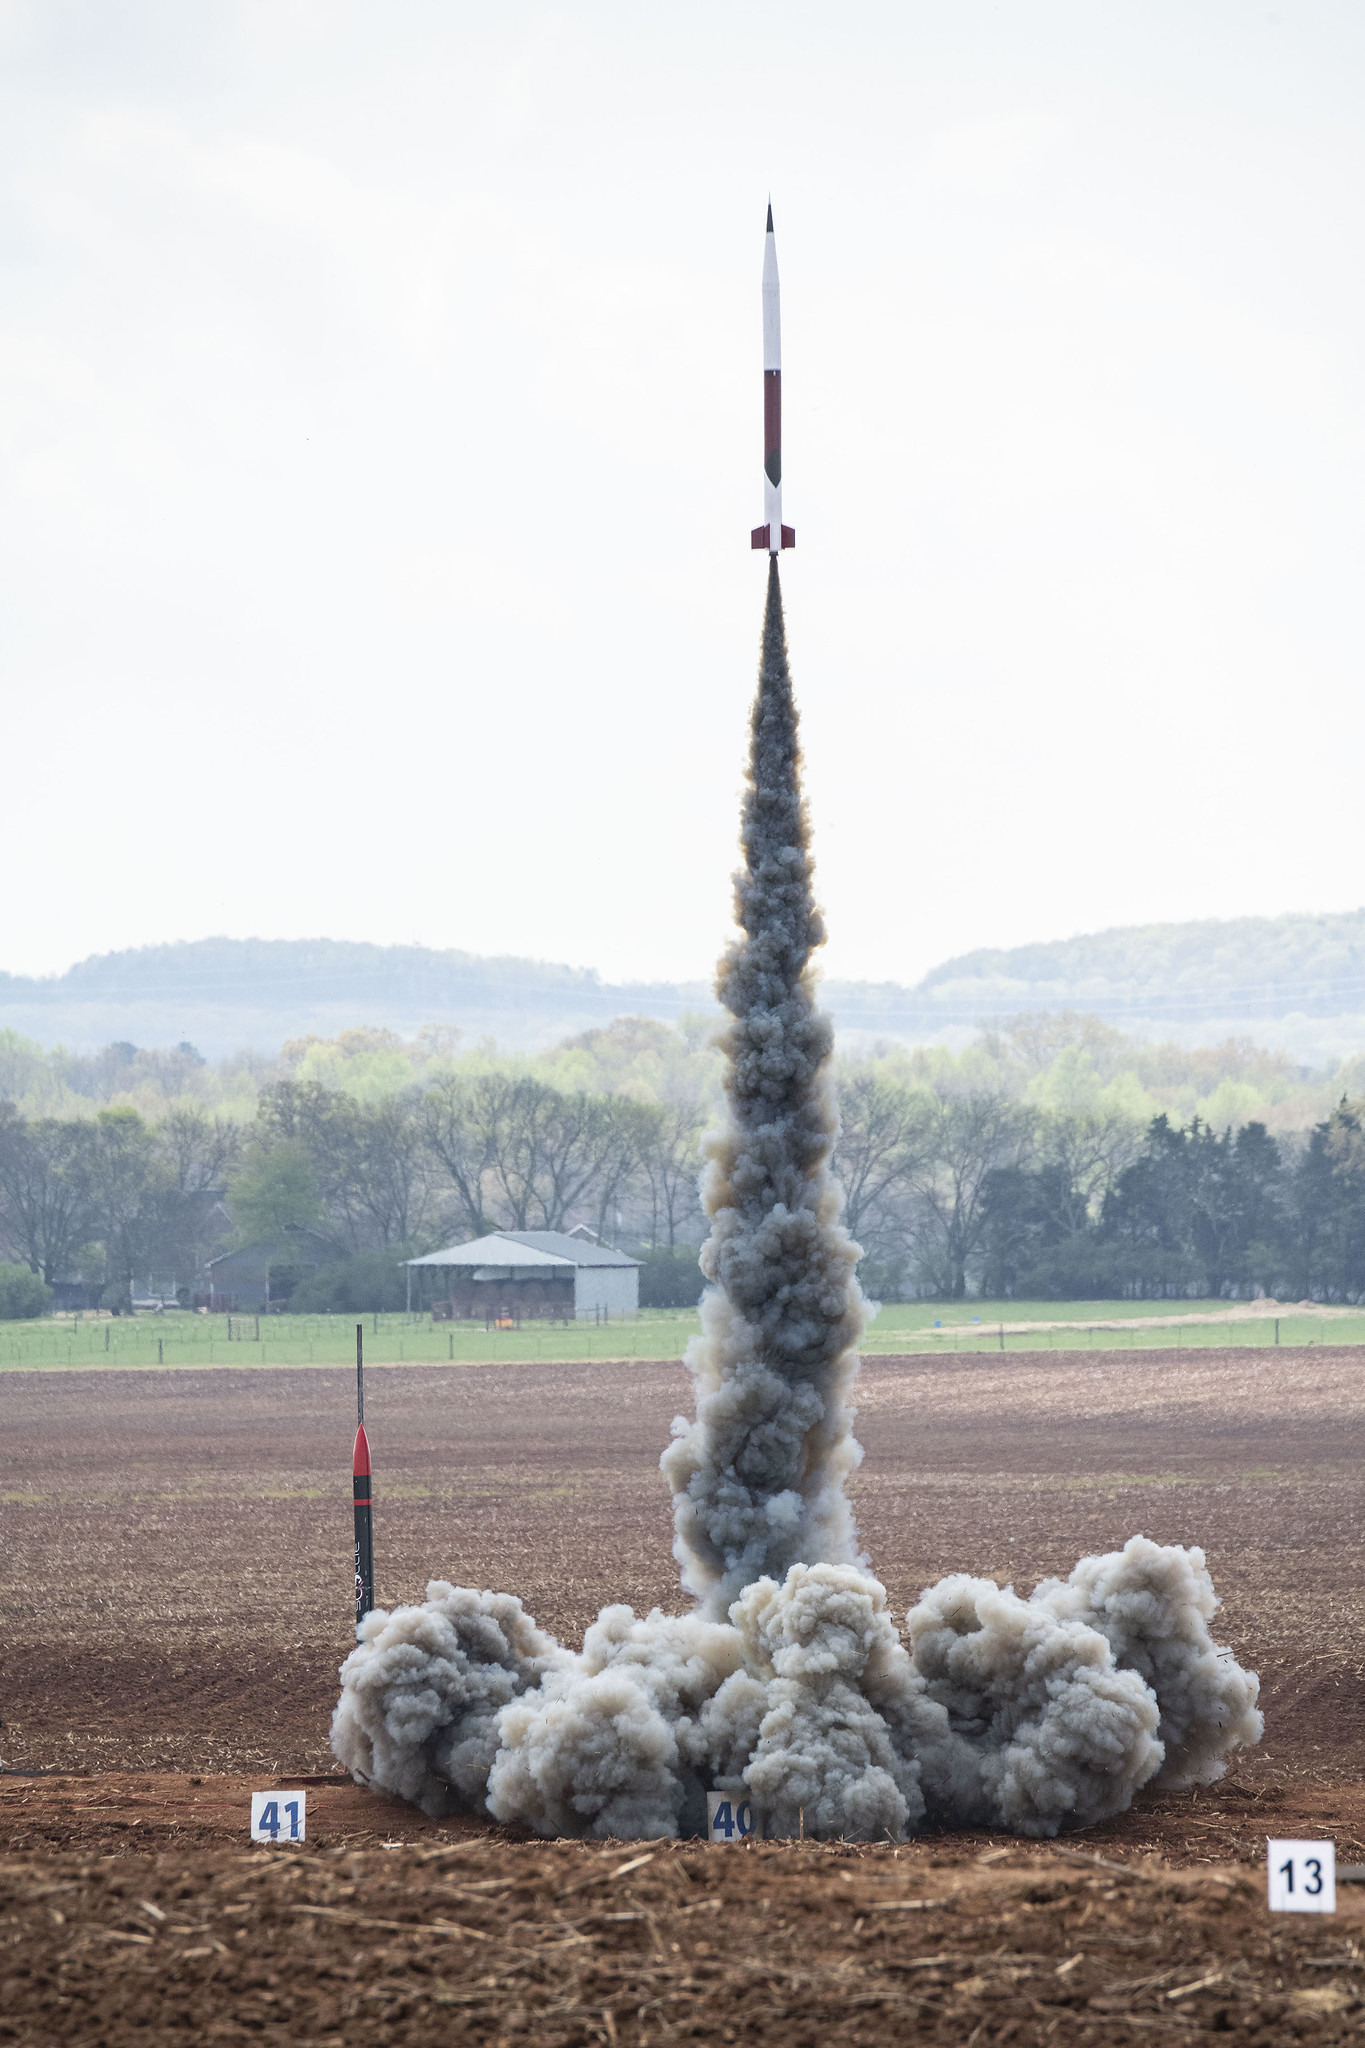 Student teams launch rockets as part of NASA’s Student Launch competition in 2019.